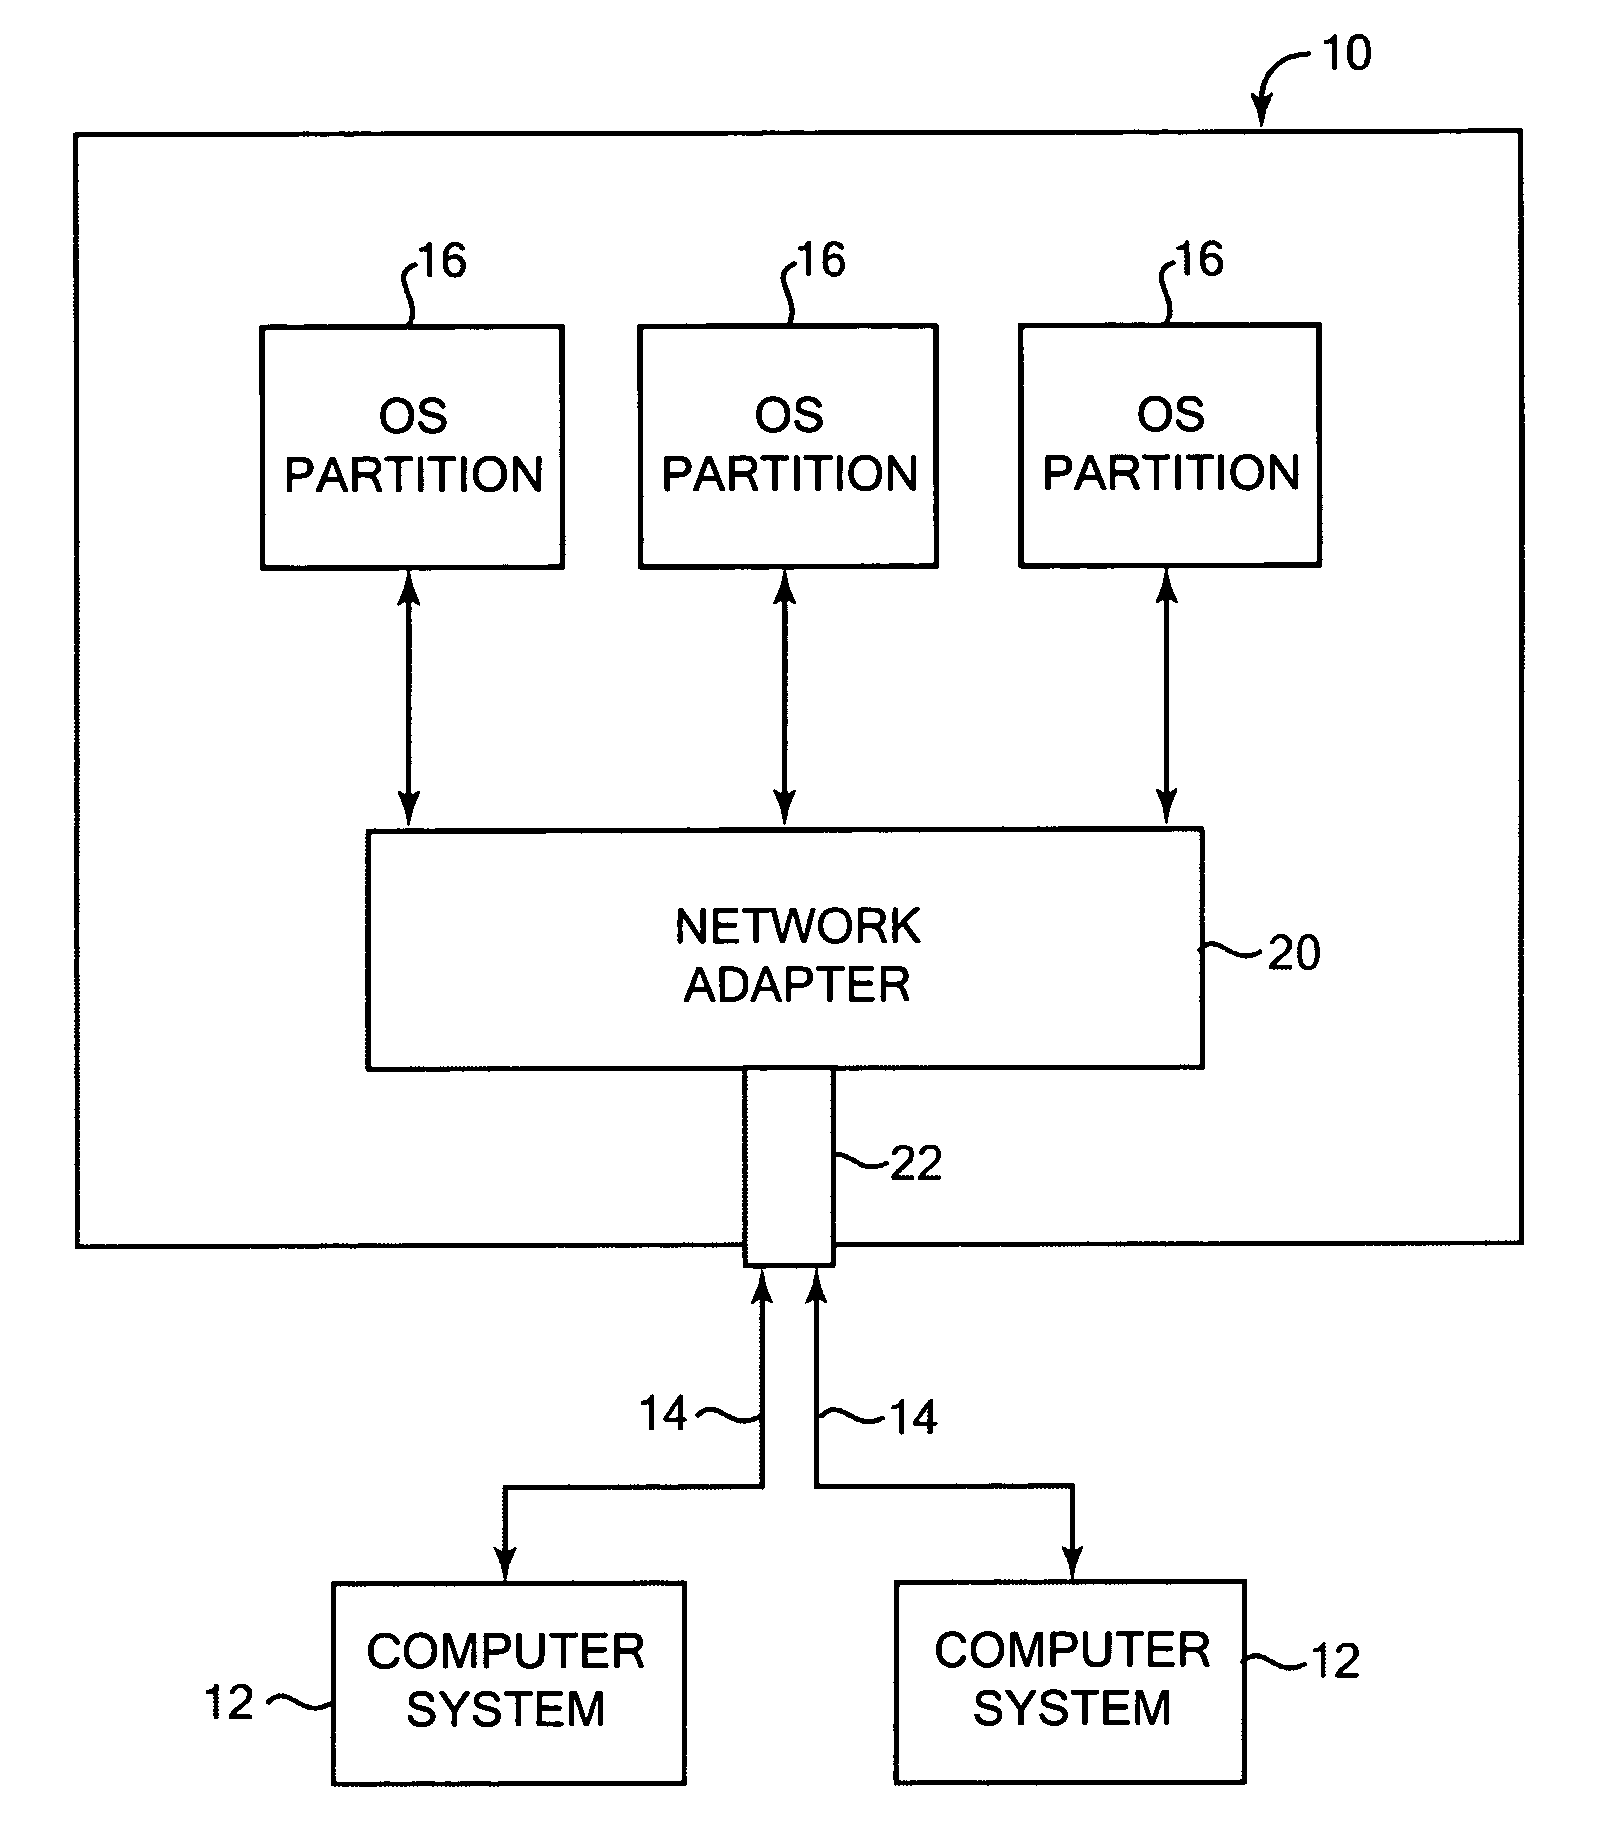 Network communications for operating system partitions